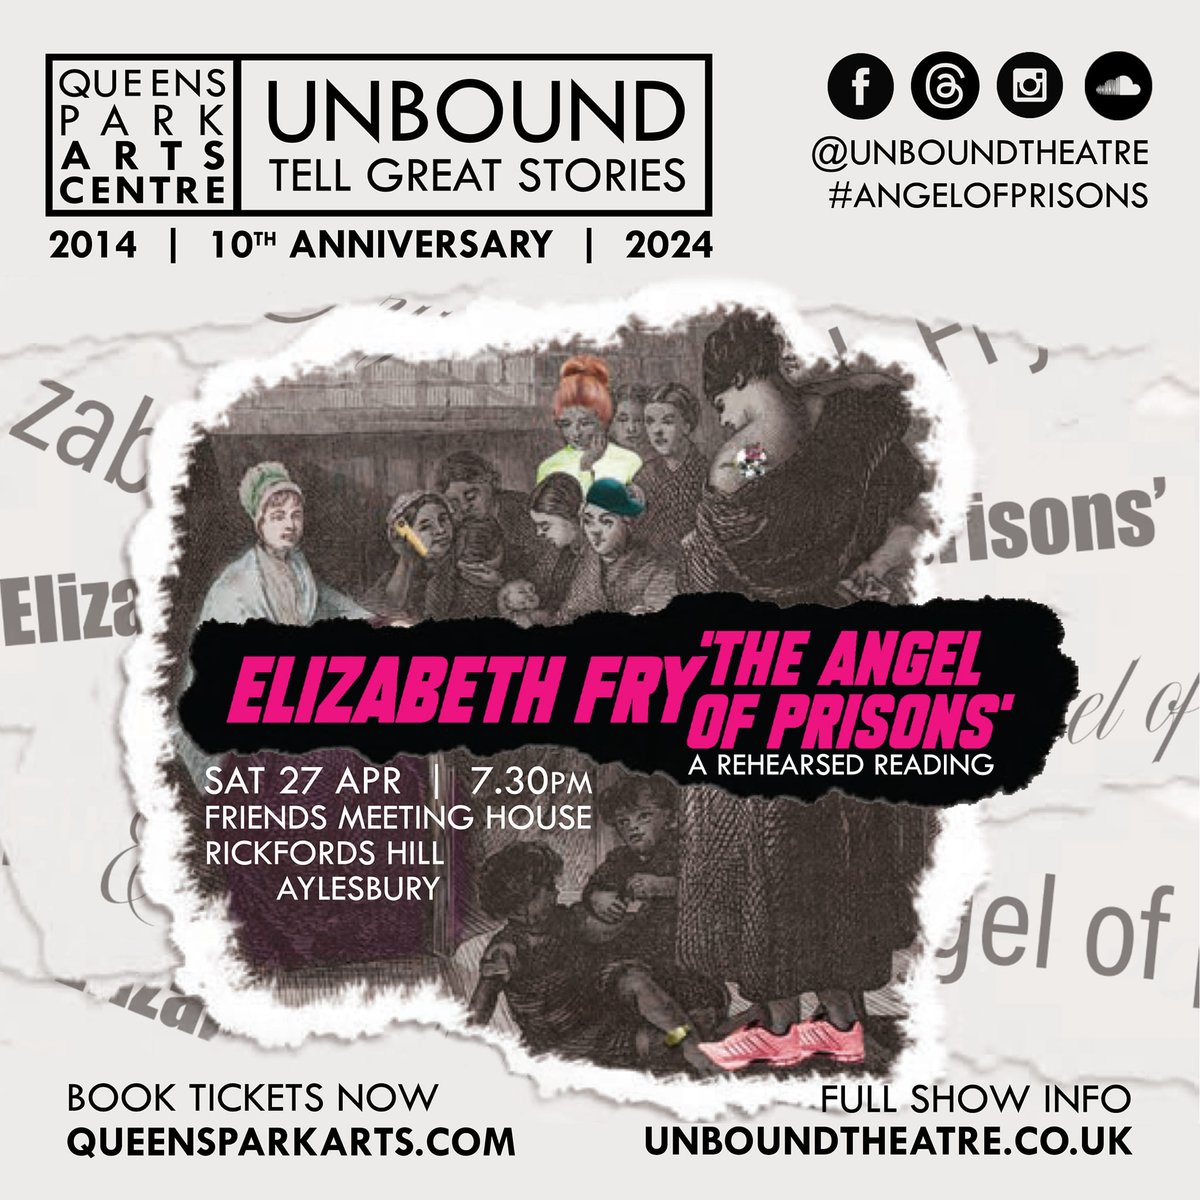 Final prep underway for tonight's rehearsed reading of 'Elizabeth Fry - The Angel of Prisons' by James Kenworth at the Friends Meeting House - and tickets are sold out!

#TellGreatStories